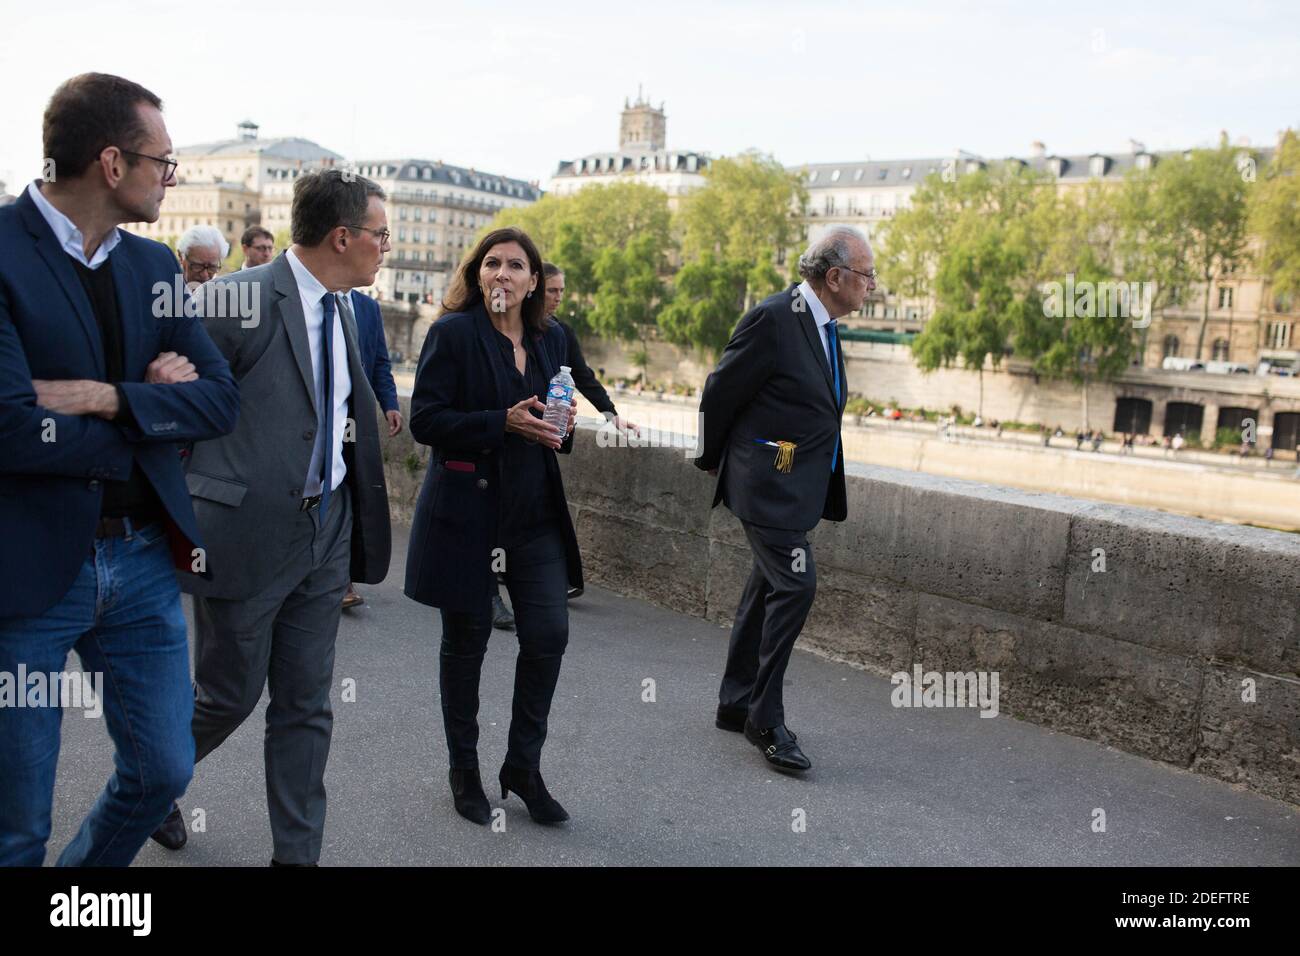 Anne Hidalgo Walks by the Seine front of Notre Dame cathedral on April 18, 2019 in Paris. France paid a daylong tribute on April 18, 2019 to the Paris firefighters who saved Notre Dame Cathedral from collapse, while construction workers rushed to secure an area above one of the church's famed rose-shaped windows and other vulnerable sections of the fire-damaged landmark. Photo by Raphael Lafargue/ABACAPRESS.COM Stock Photo